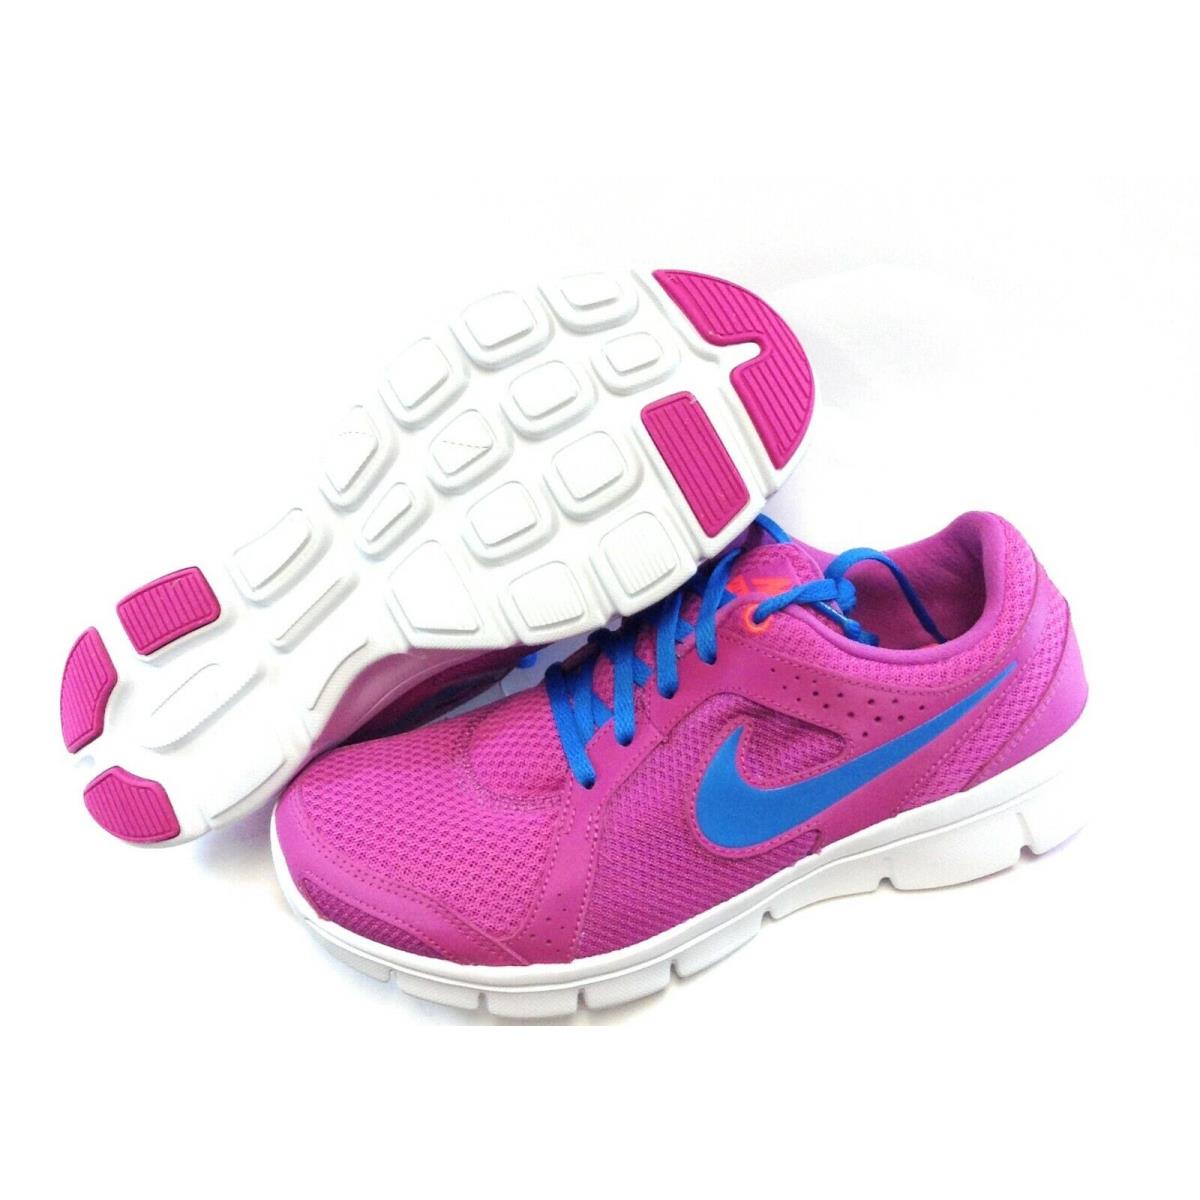 Womens Nike Flex Experience RN 2 599548 601 Fuchsia Blue 2013 DS Sneakers Shoes